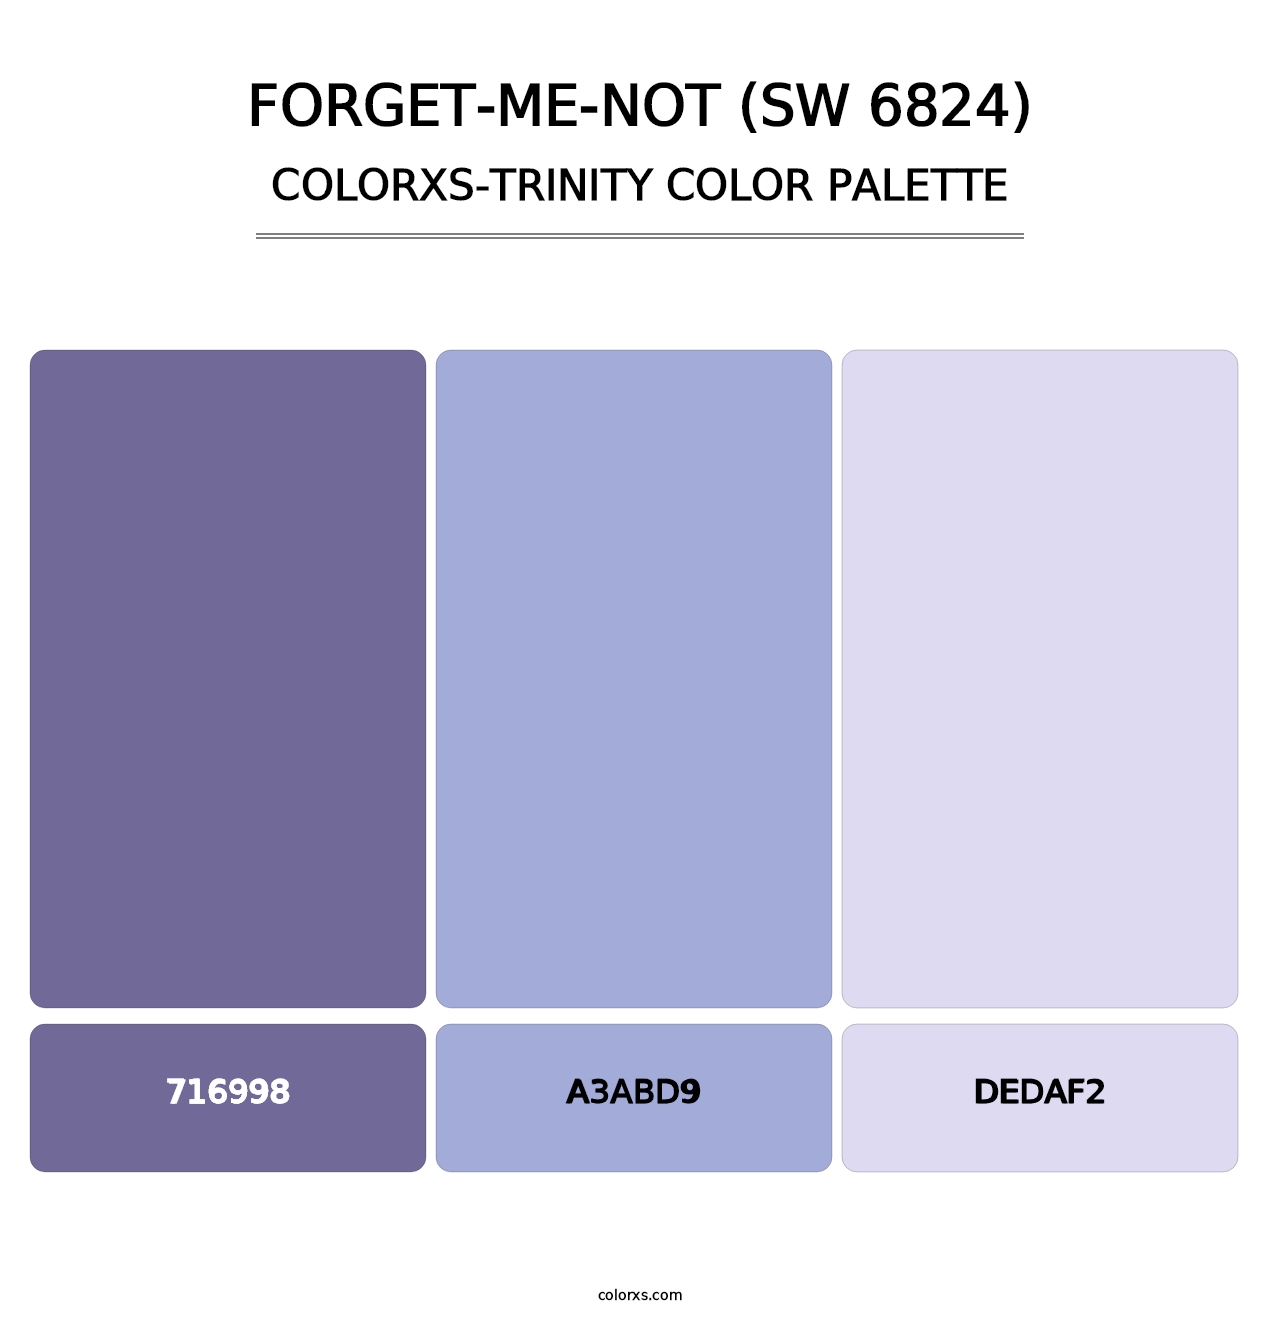 Forget-Me-Not (SW 6824) - Colorxs Trinity Palette